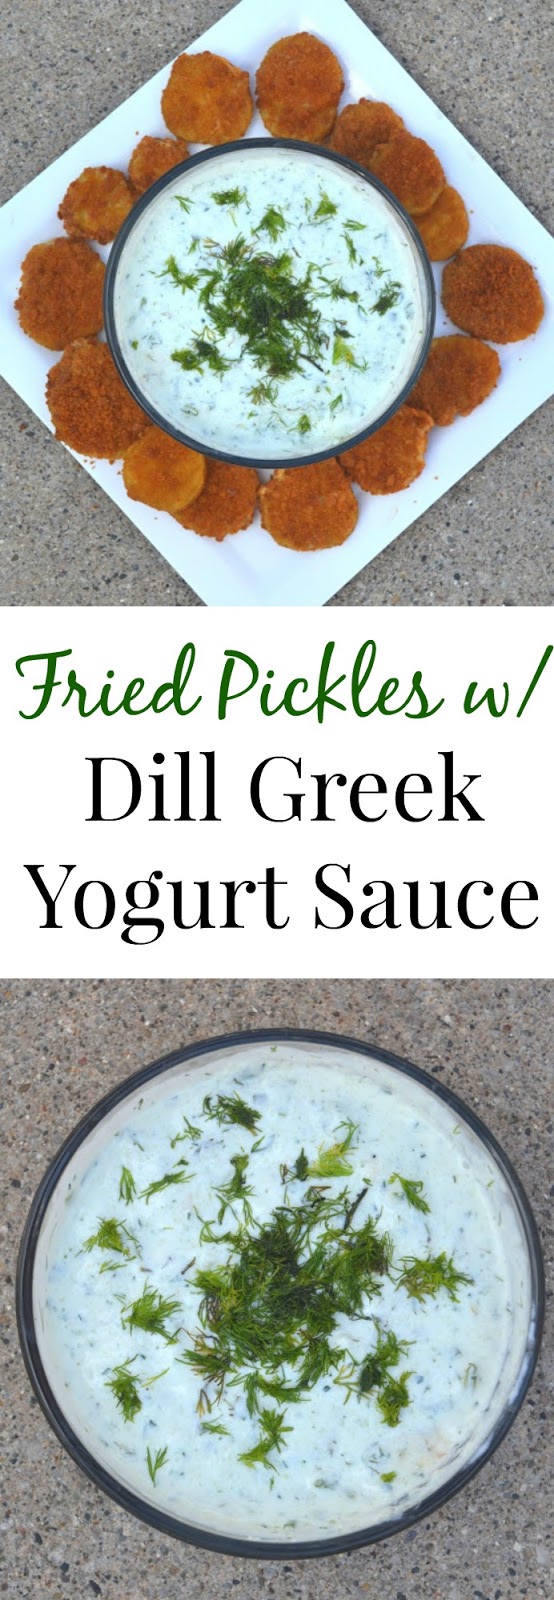 Fried Pickles with Dill Greek Yogurt Sauce- a simple appetizer that is bursting with flavor. You will want to eat the dill Greek yogurt sauce on everything! www.nutritionistreviews.com